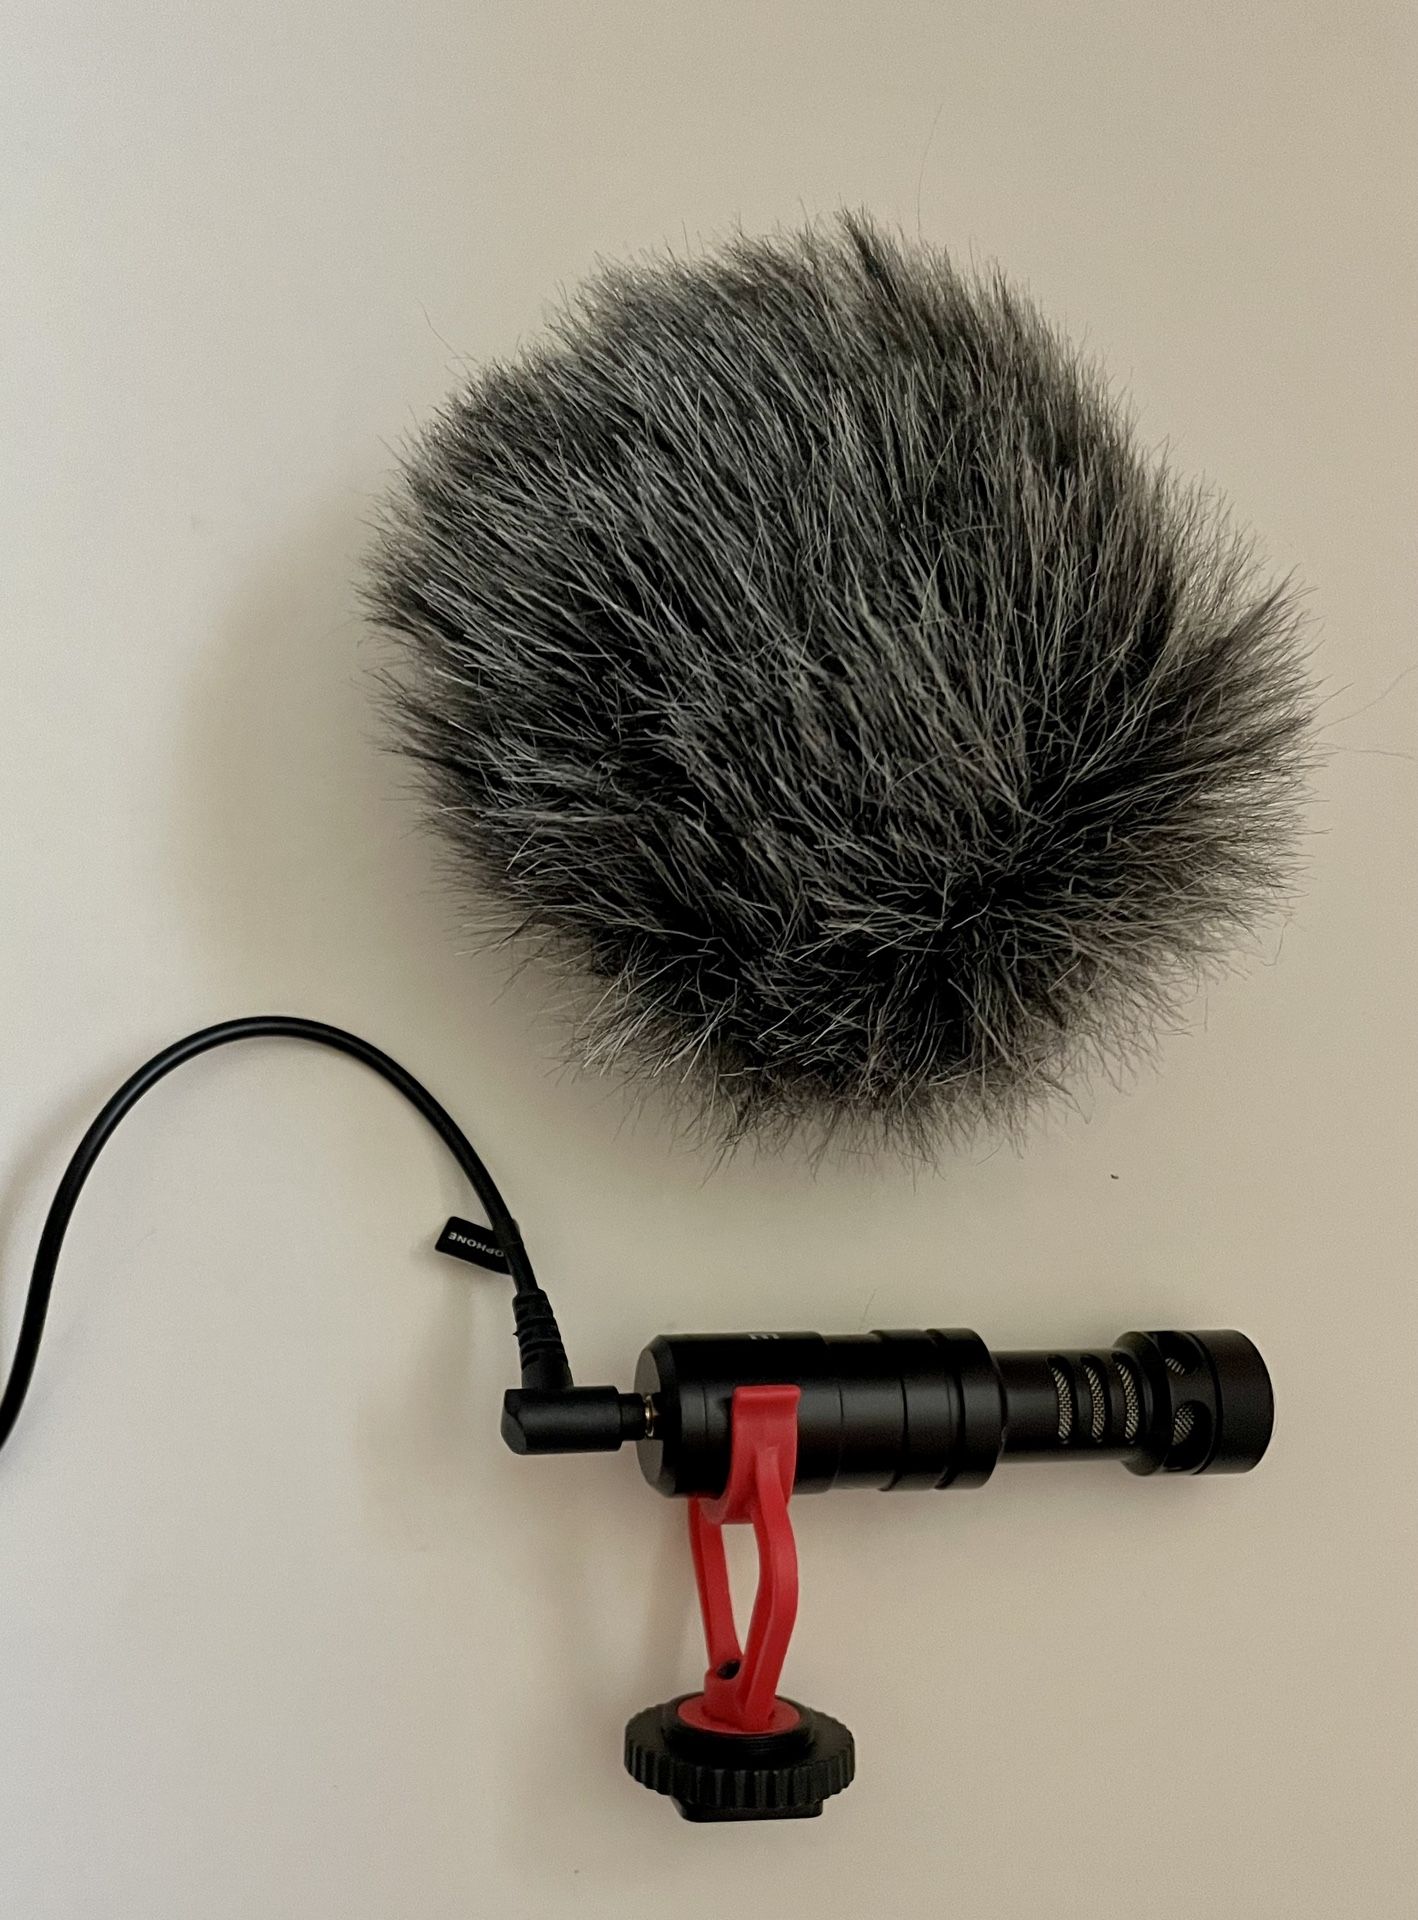 Rode Microphone